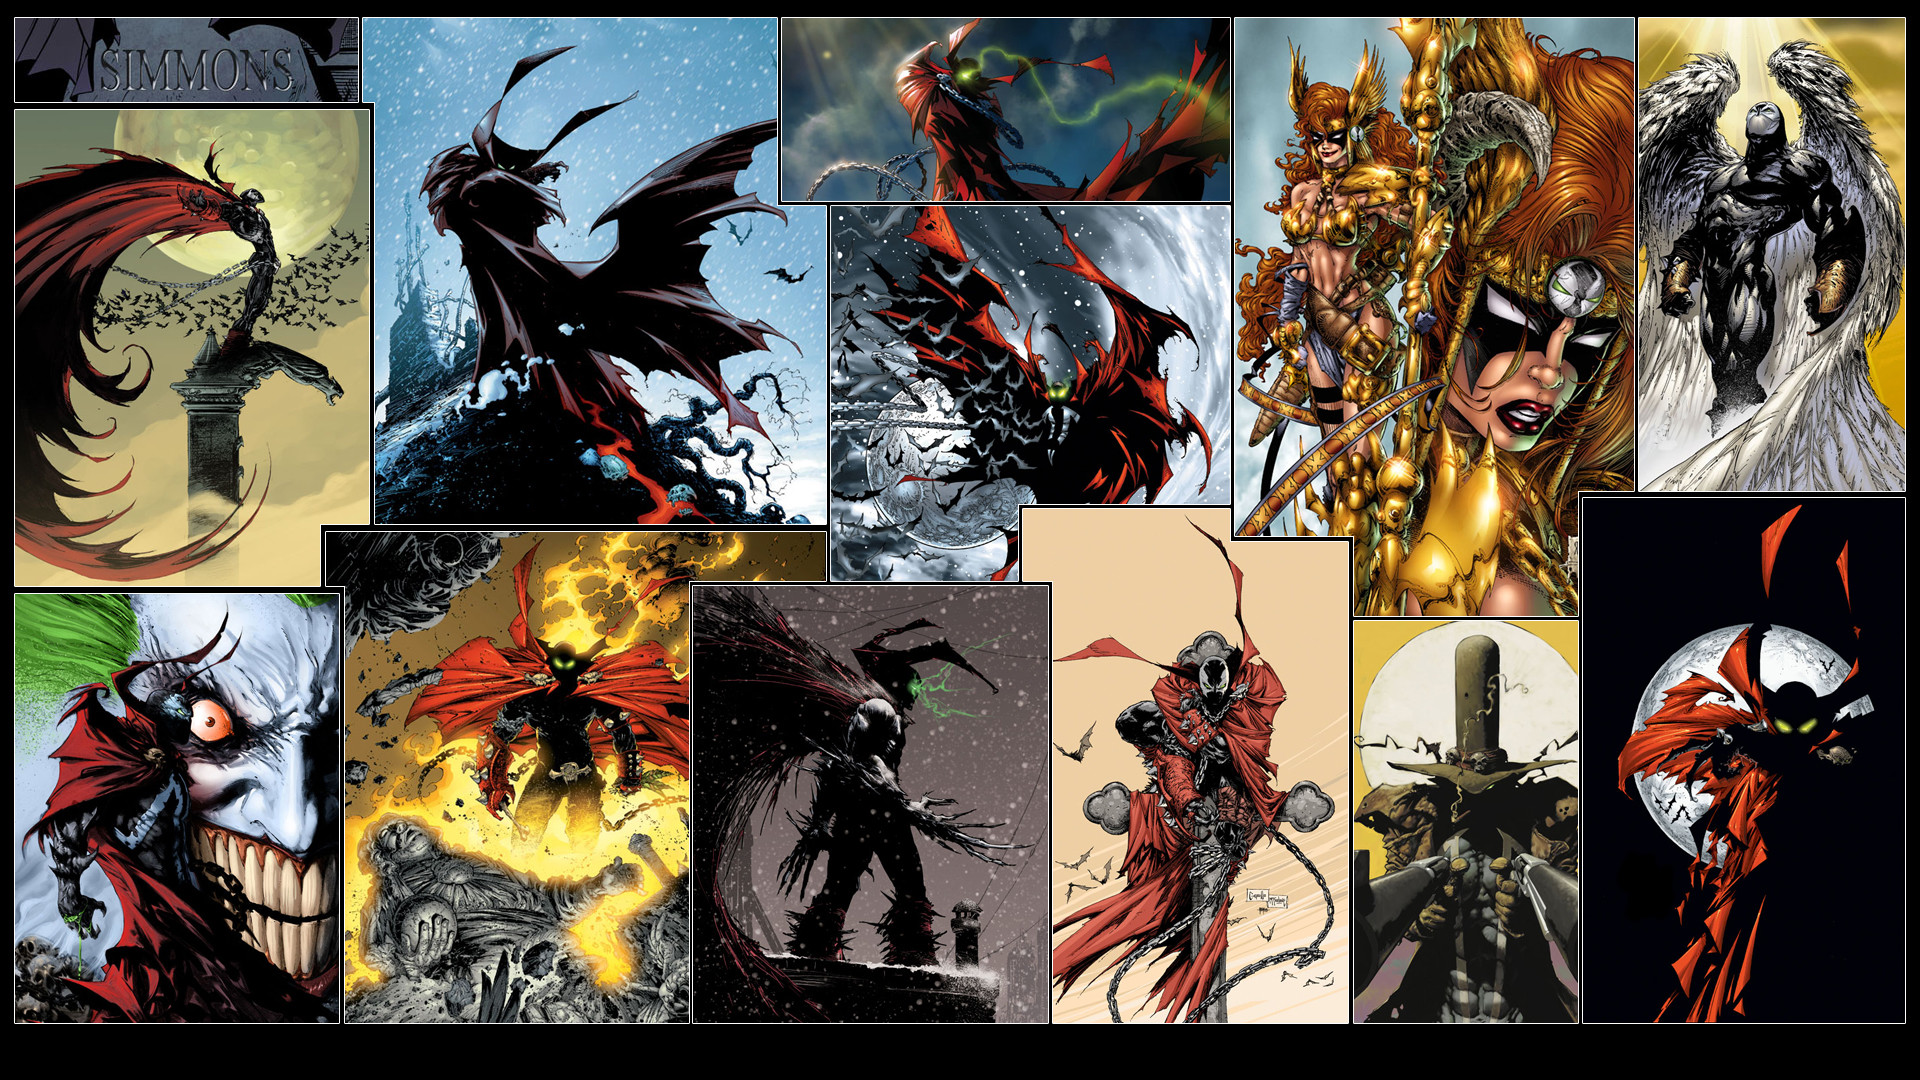 1920x1080 ... Spawn Wallpaper by GT-Orphan